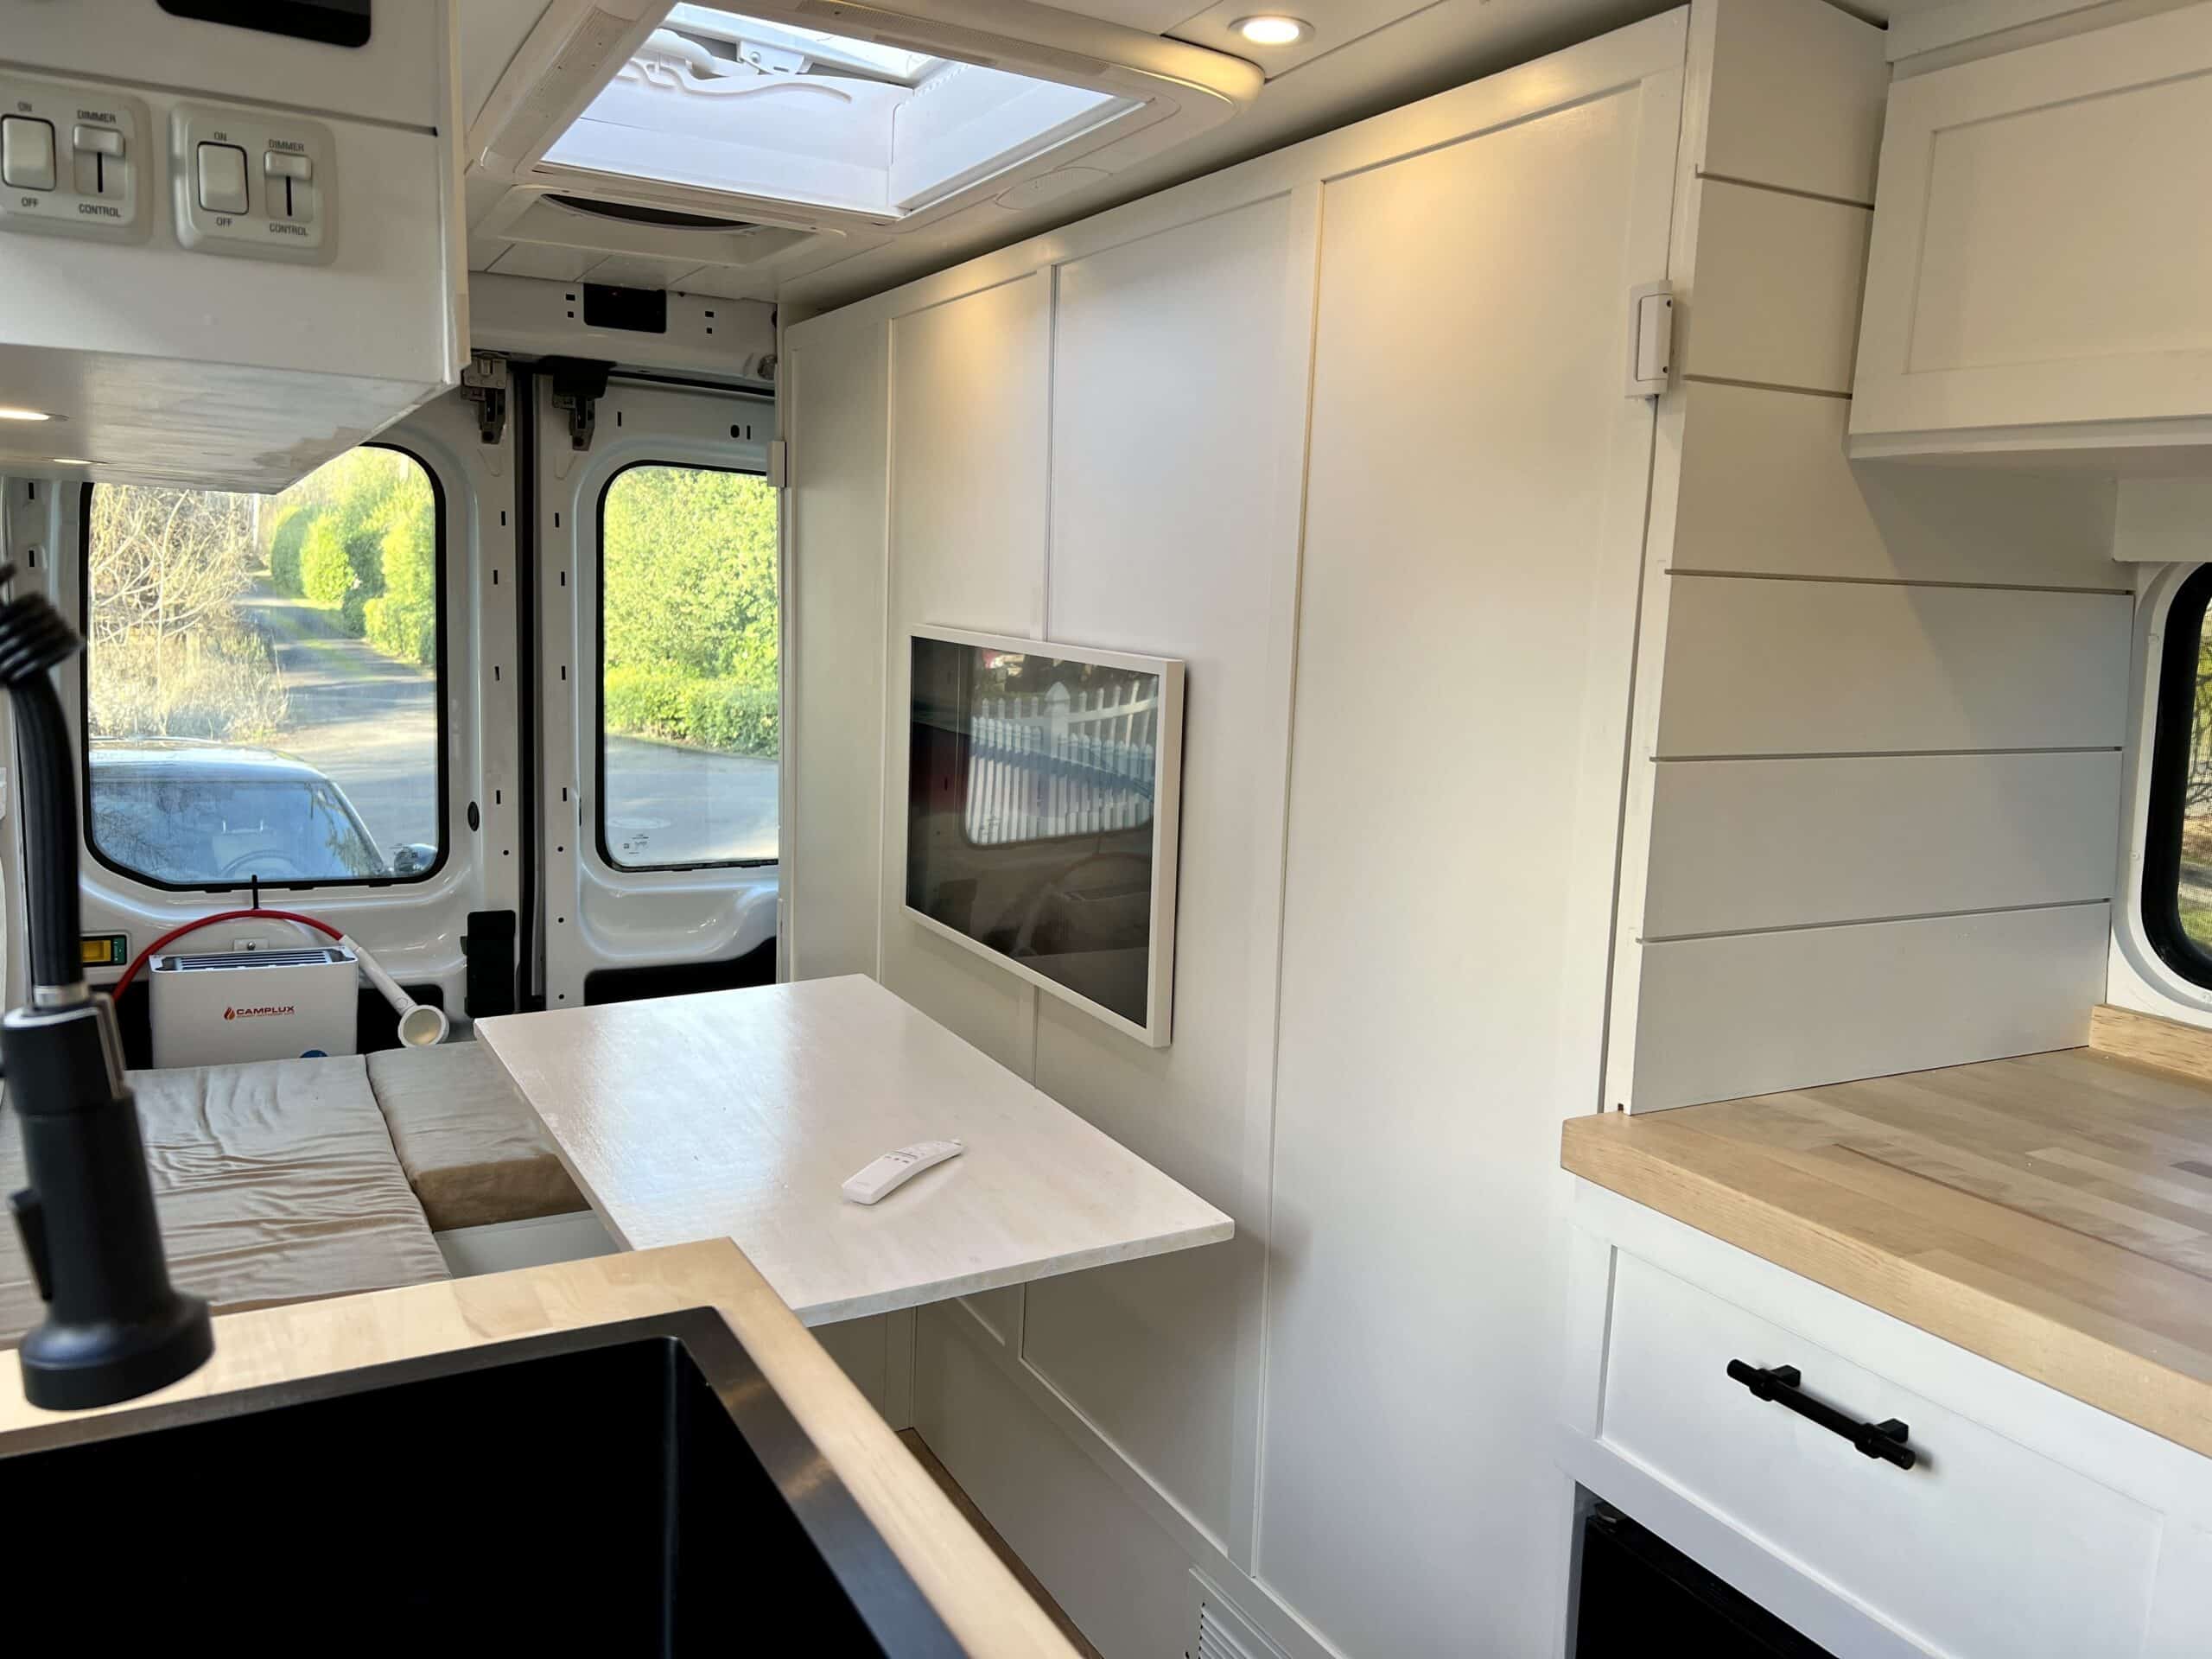 2018 Ford Transit 250 148″ Medium Roof w/Murphy Bed. New Build. Now in ...